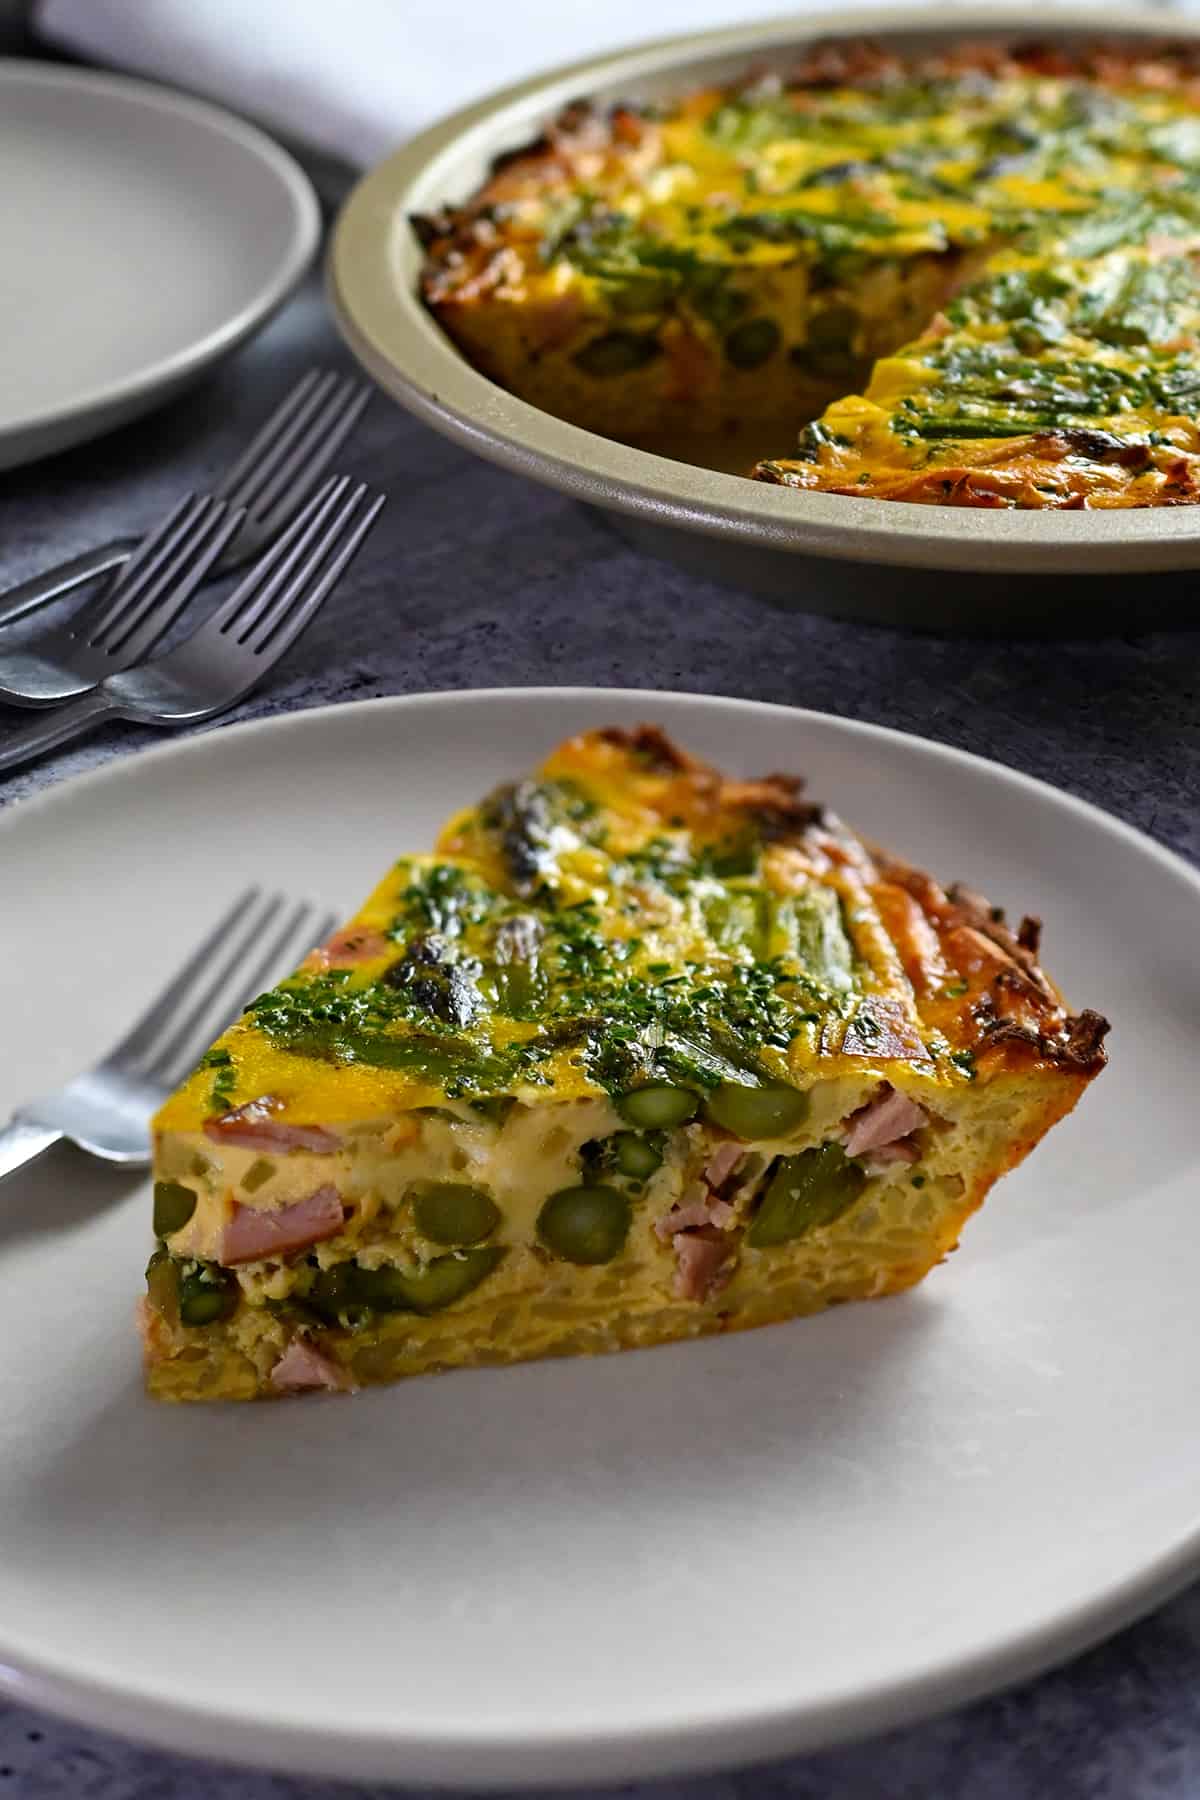 A slice of paleo and dairy free asparagus quiche on a plate in front of pie pan with quiche inside.